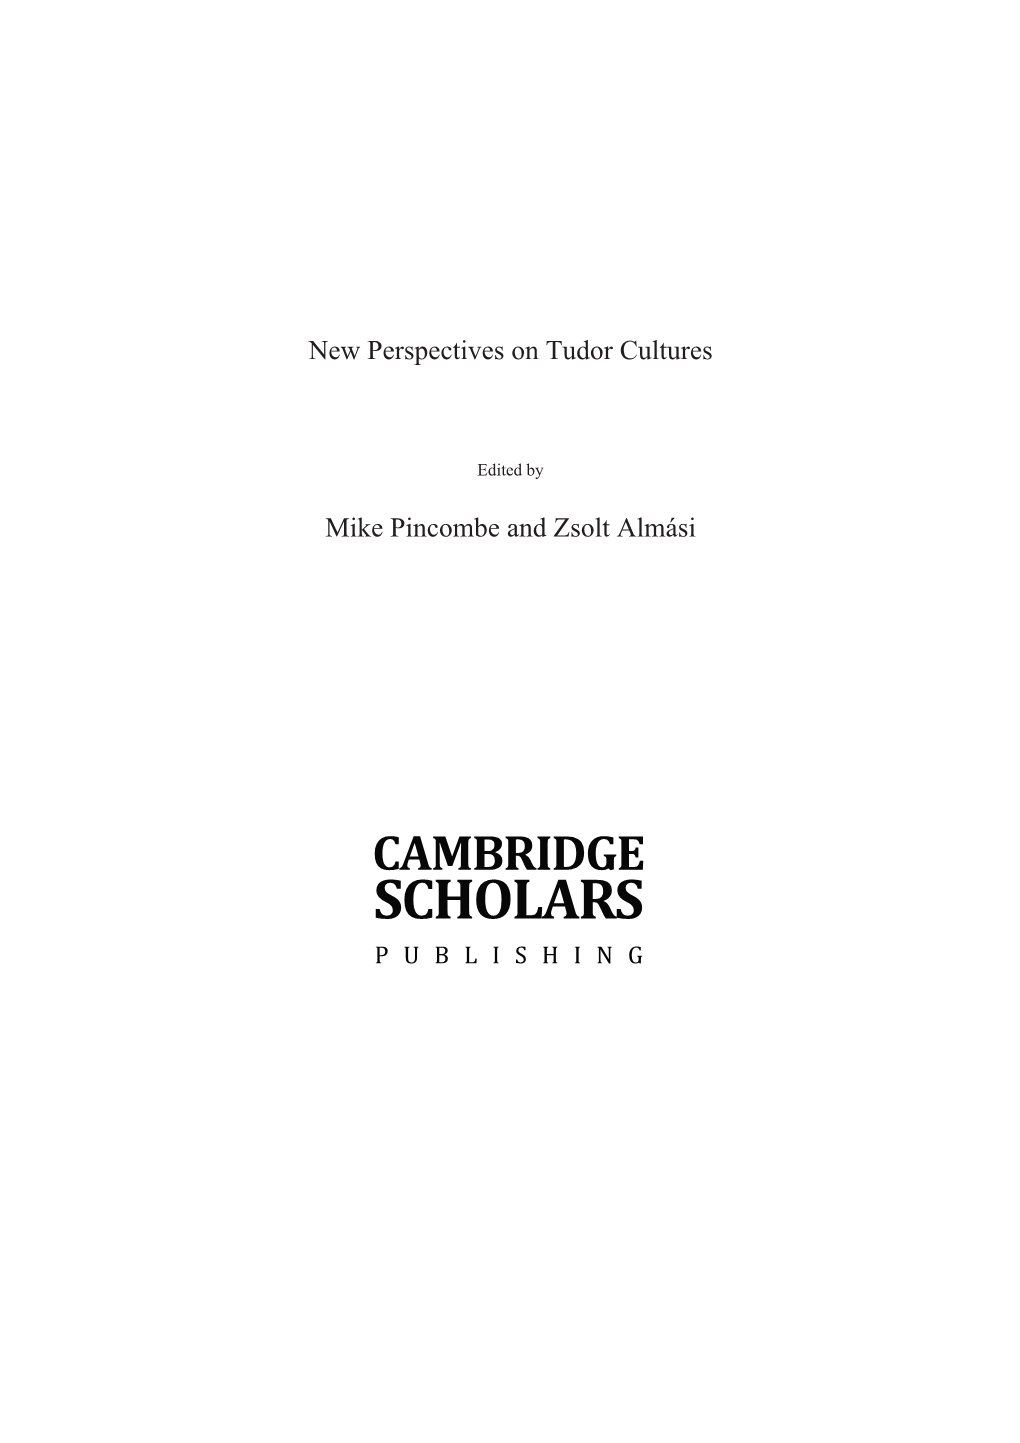 New Perspectives on Tudor Cultures Mike Pincombe and Zsolt Almási